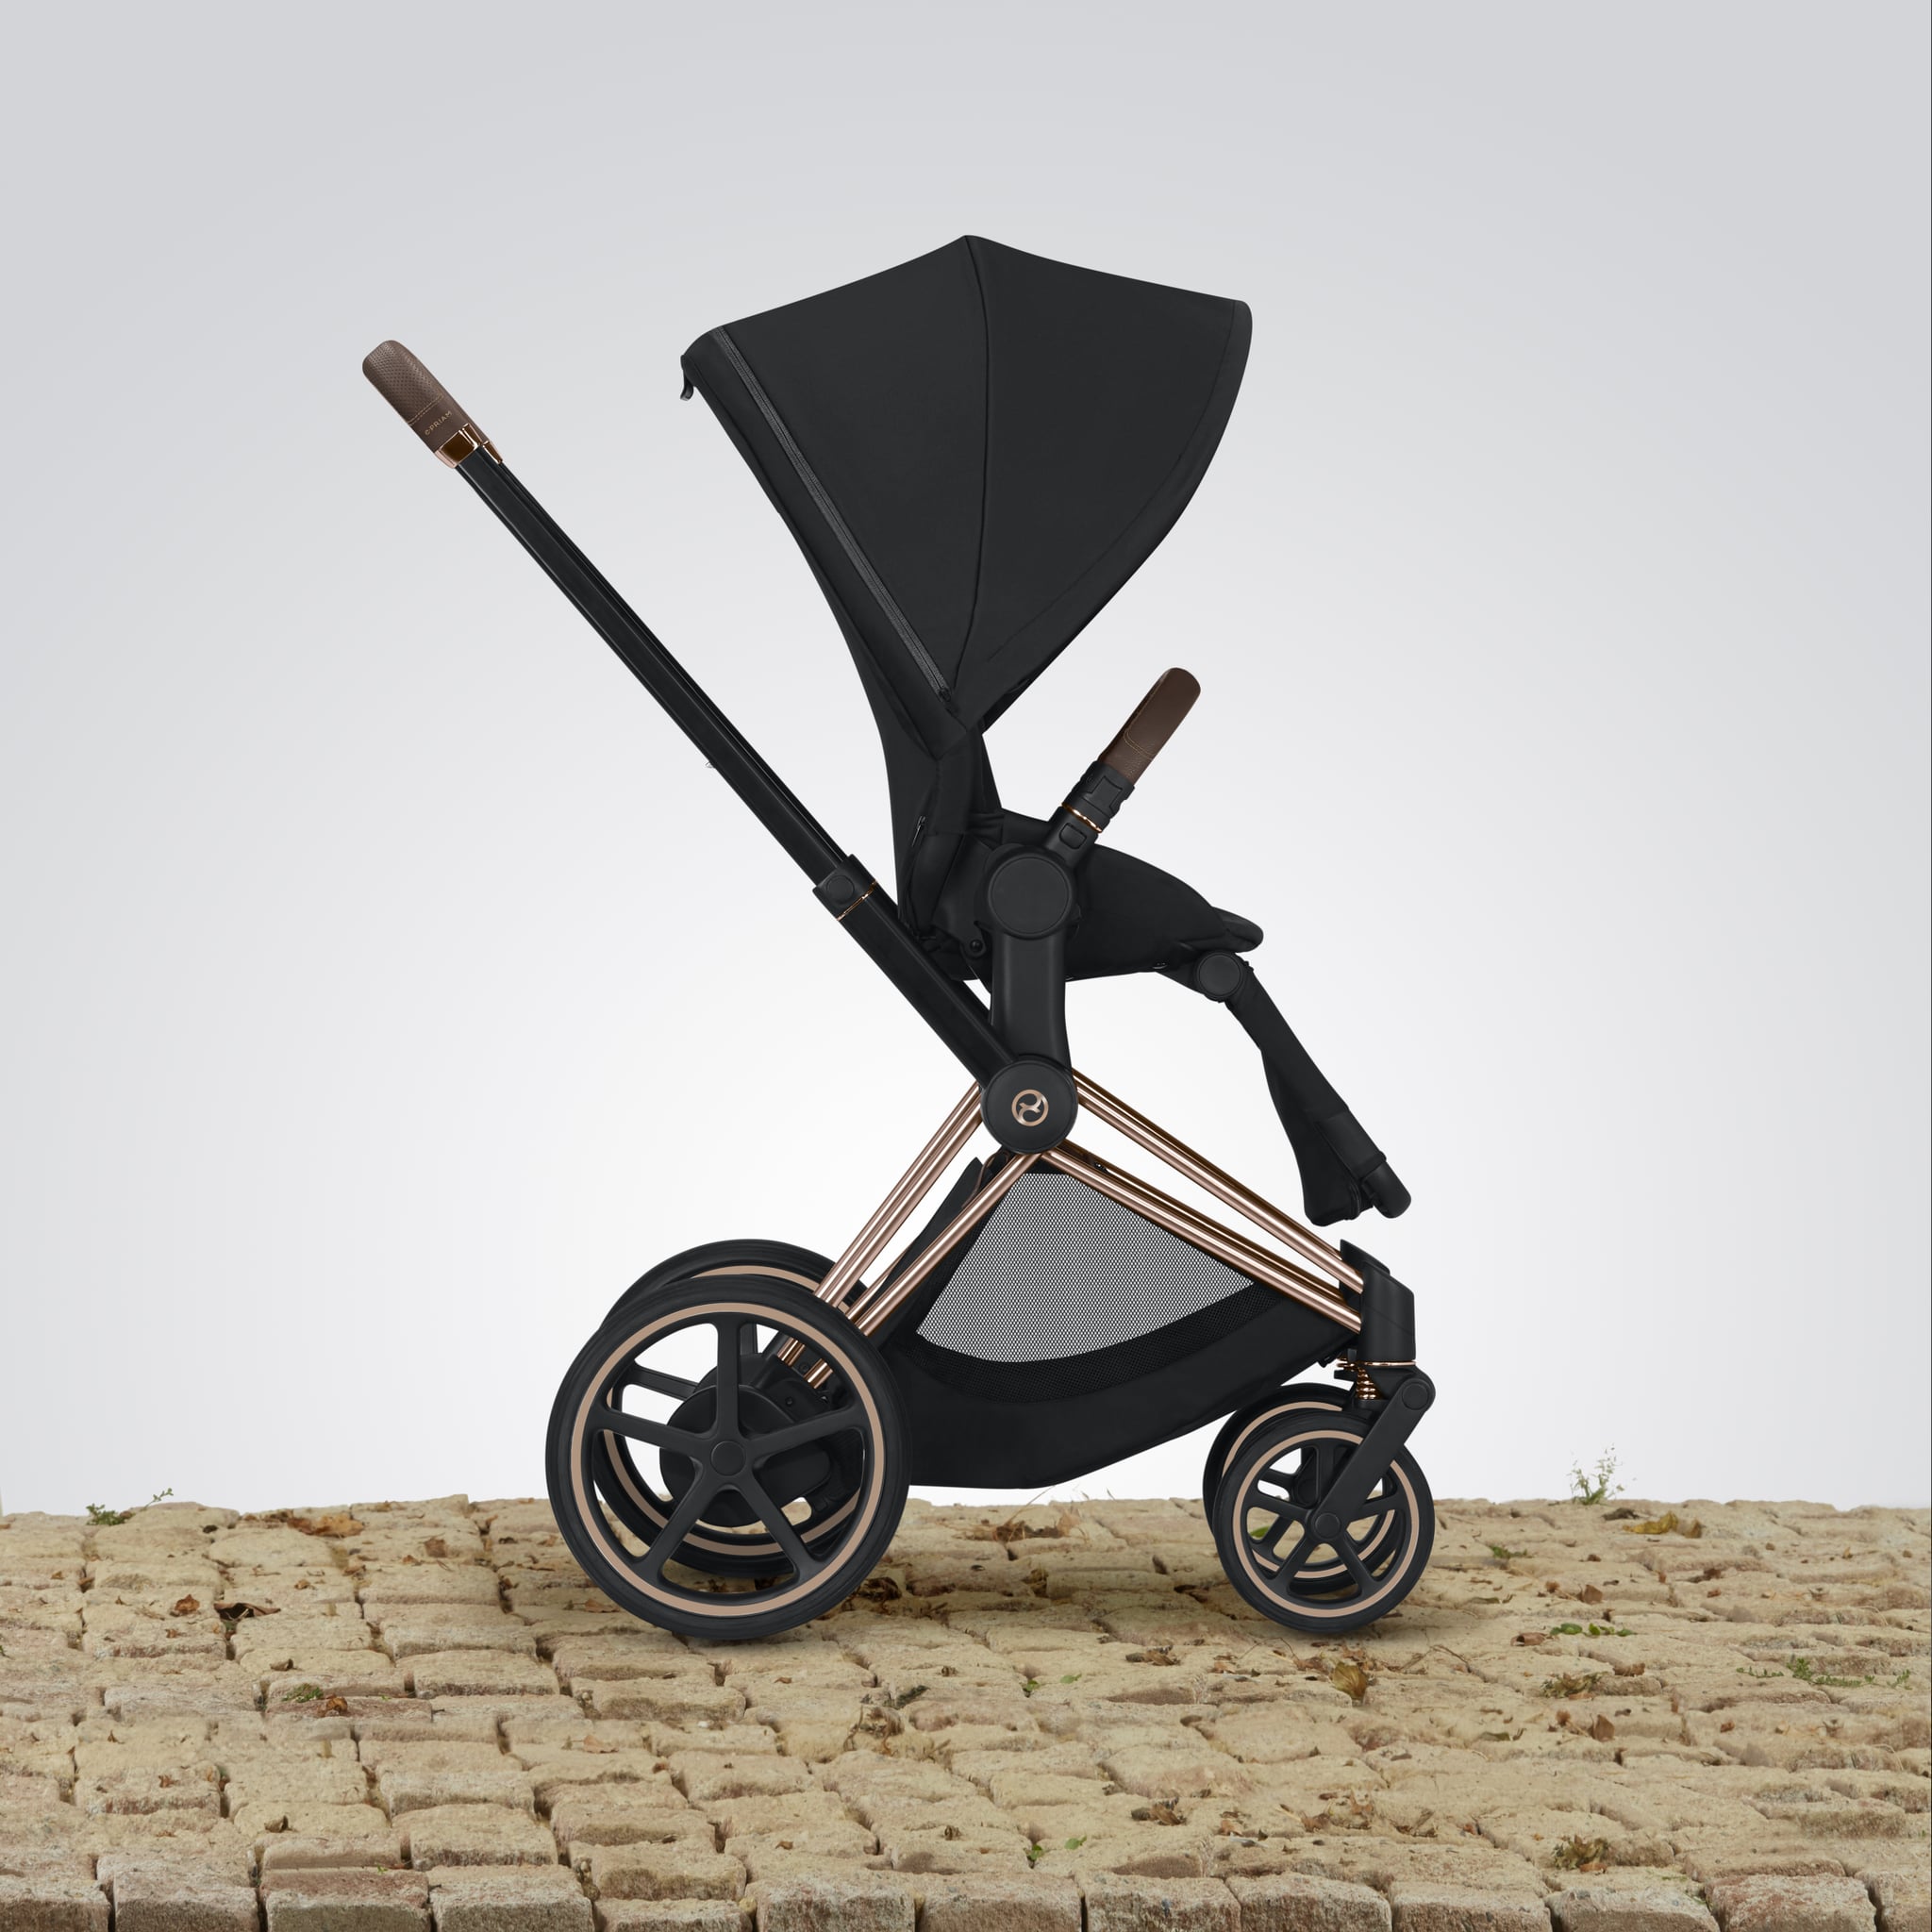 The 13 Best Baby Strollers For 2020 At Every Price Point Popsugar Family,Sun Conure Pineapple Conure